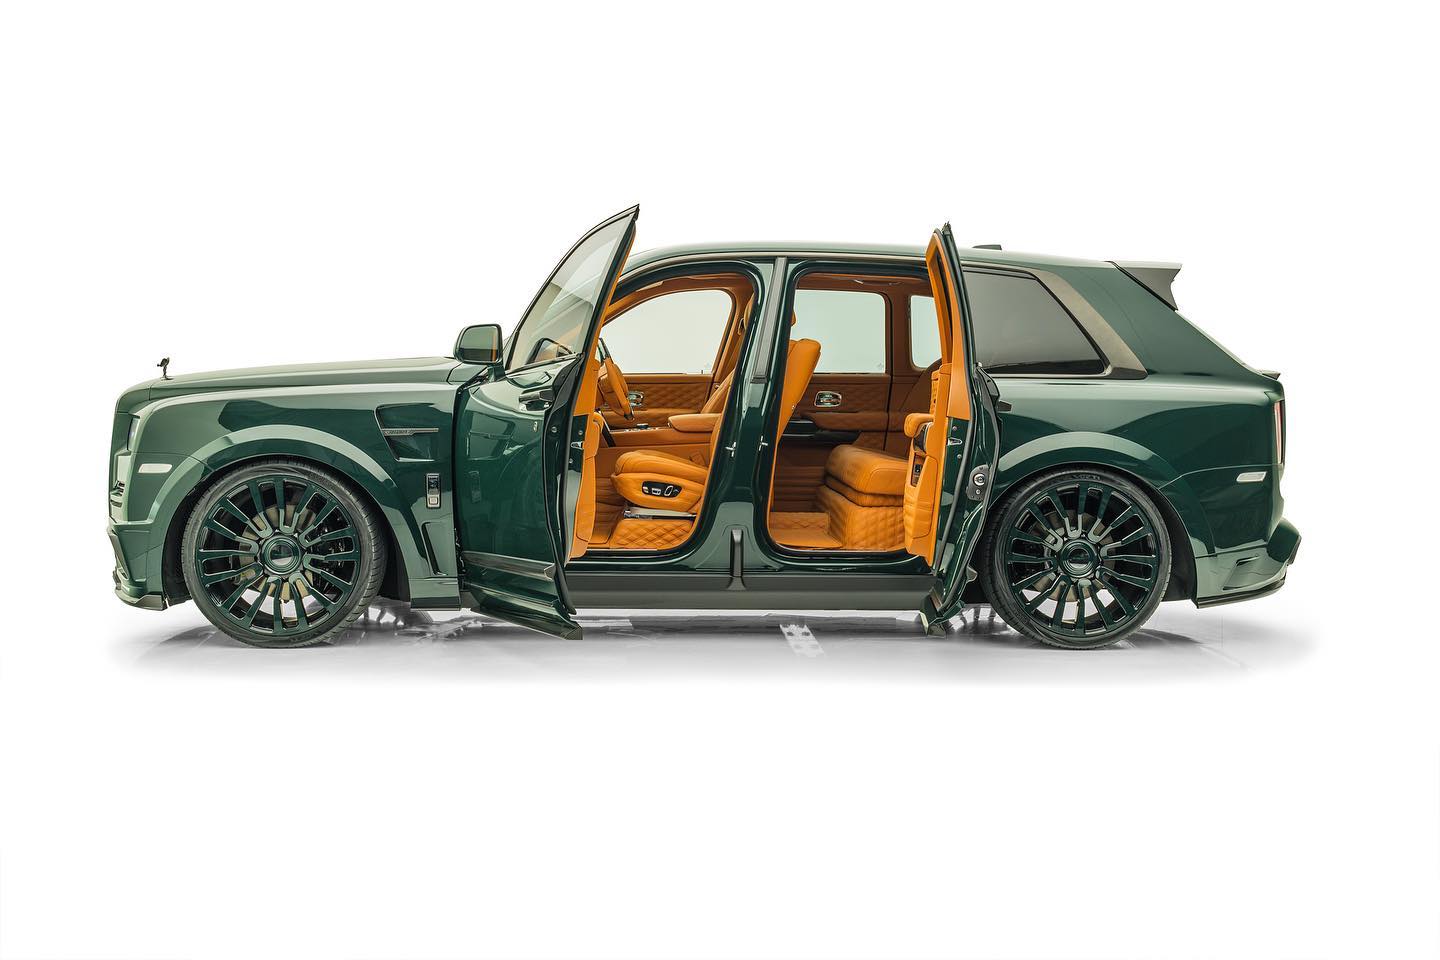 2020 Rolls Royce Cullinan Black Badge  Interior and Exterior Details   YouTube